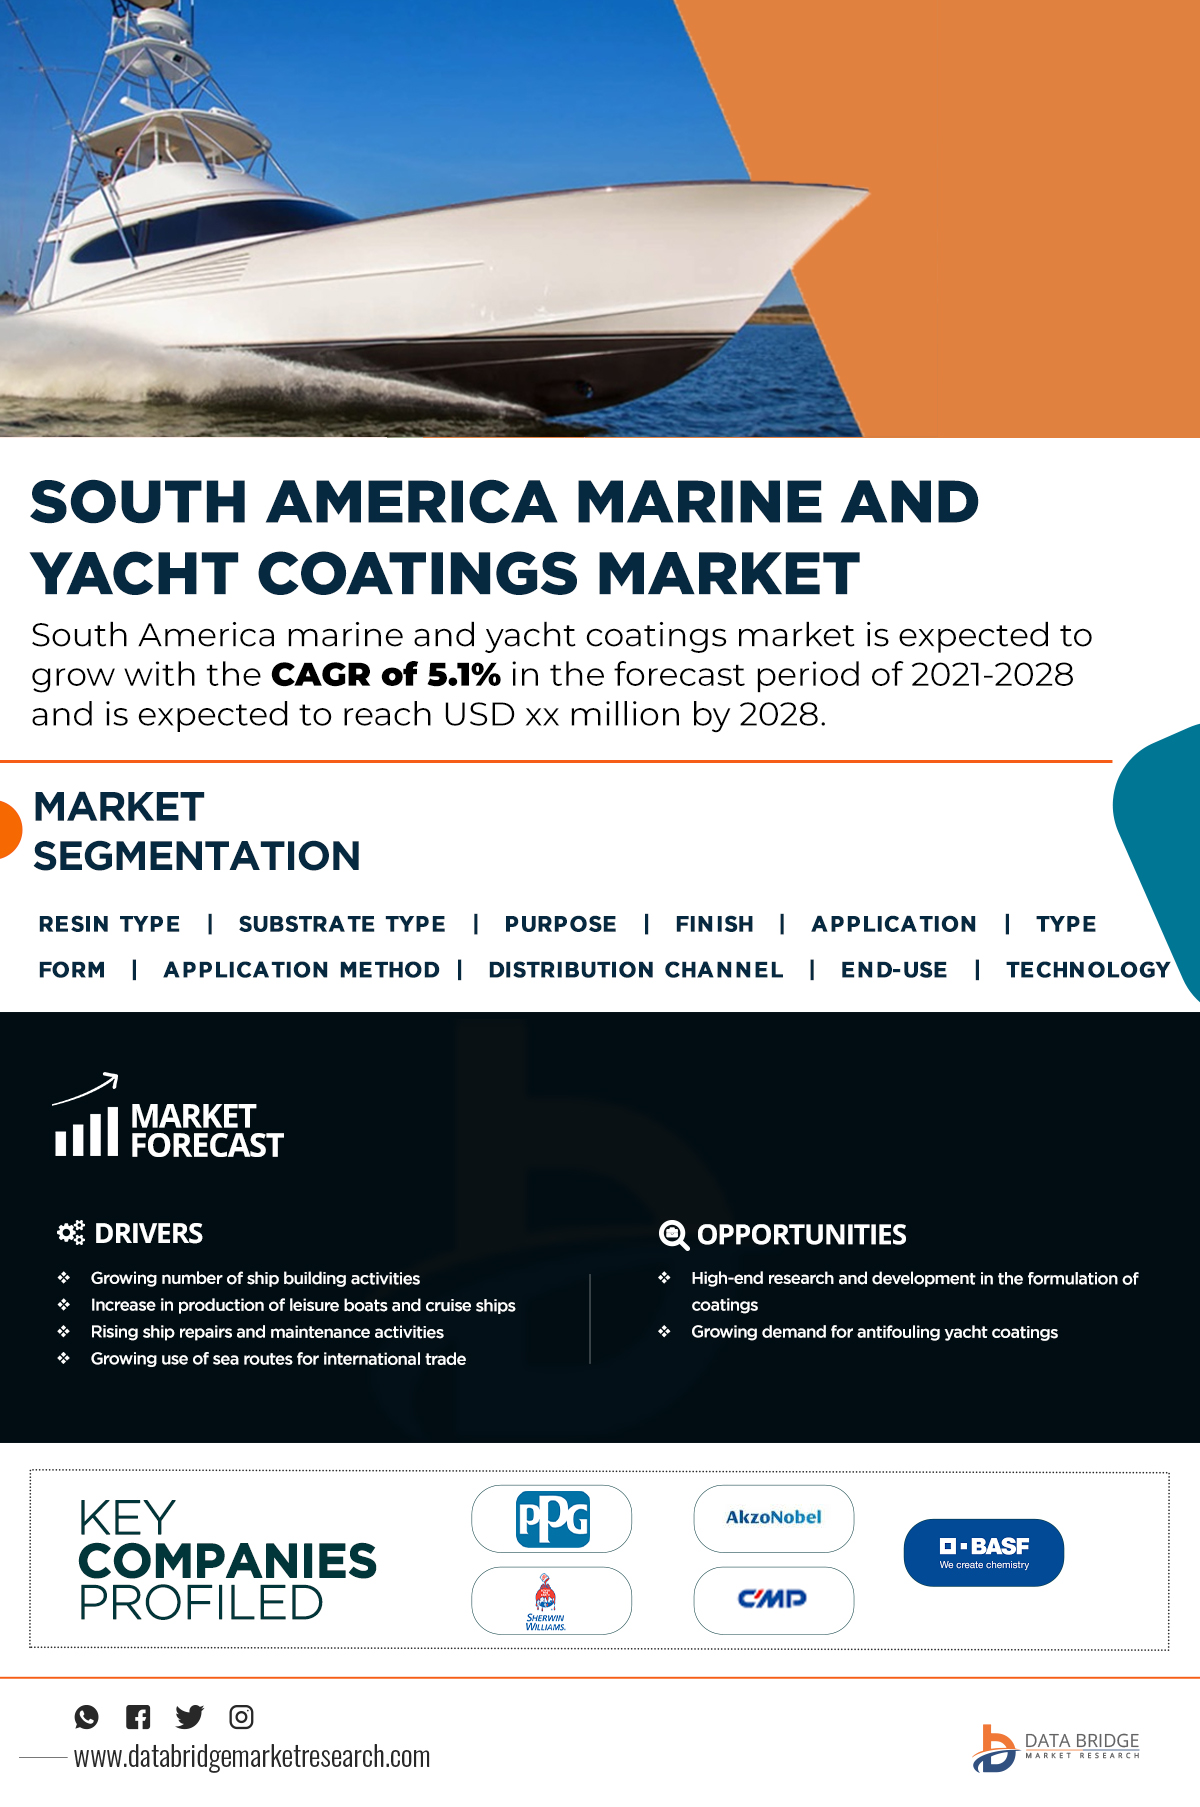 South America Marine and Yacht Coatings Market